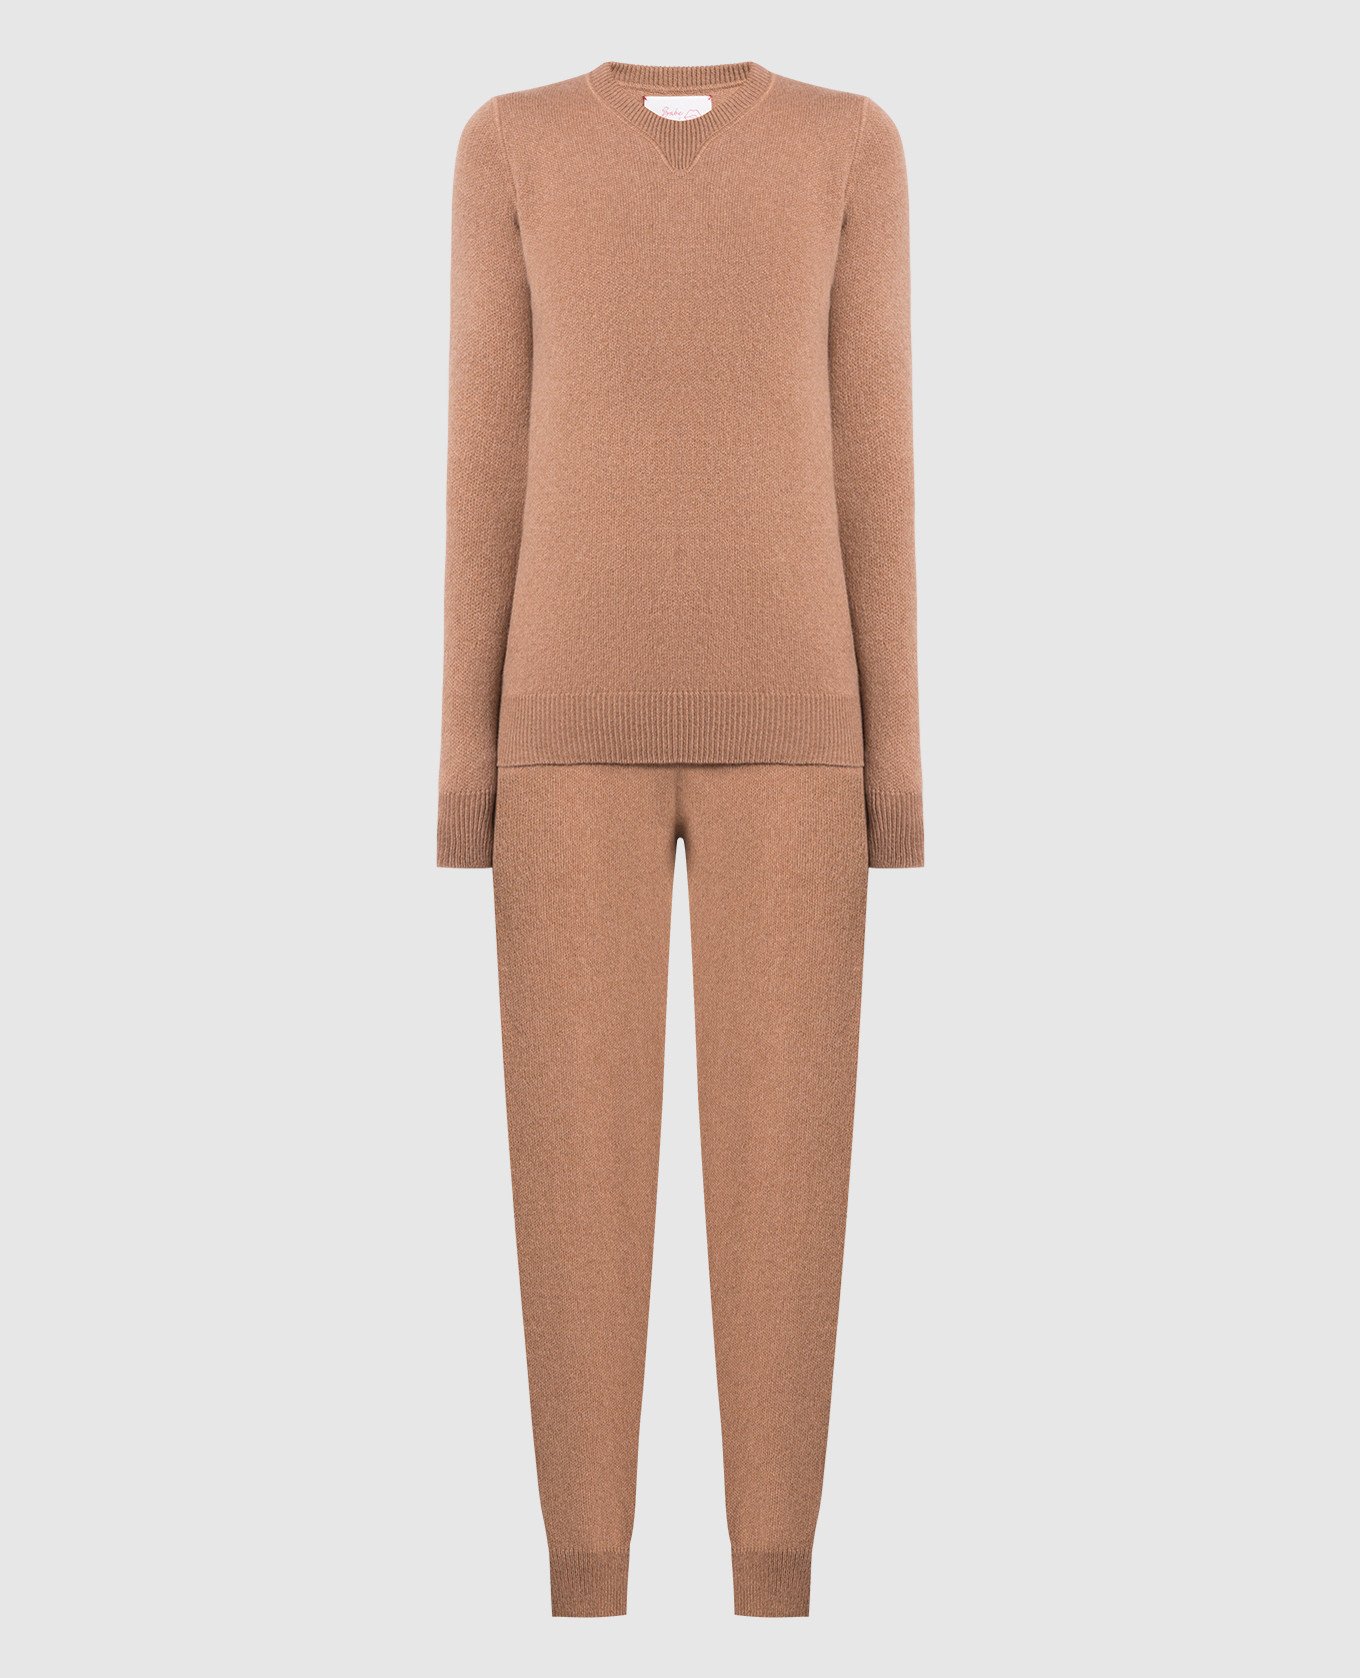 Brown cashmere jumper and joggers suit